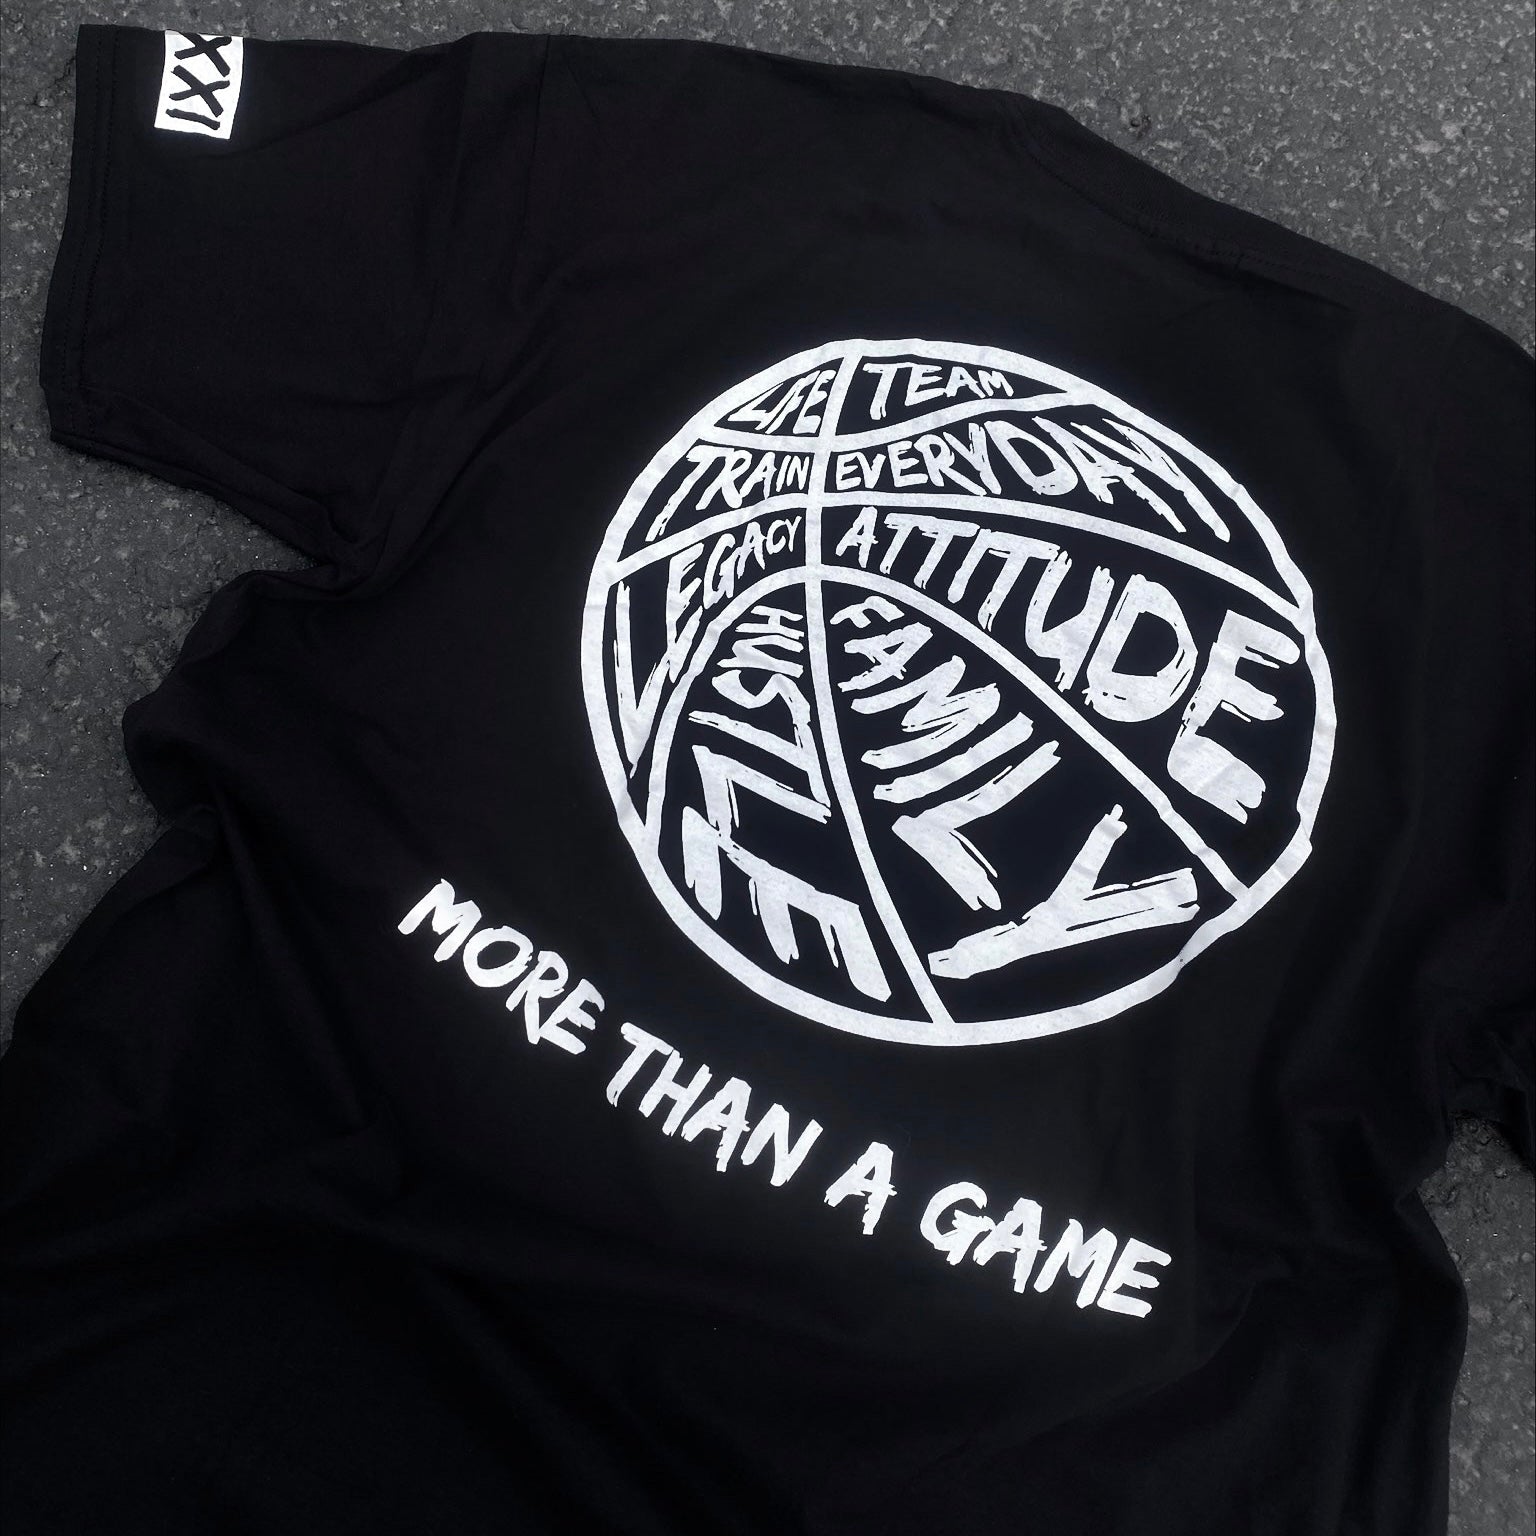 More Than A Game T-Shirt - Youth - Black